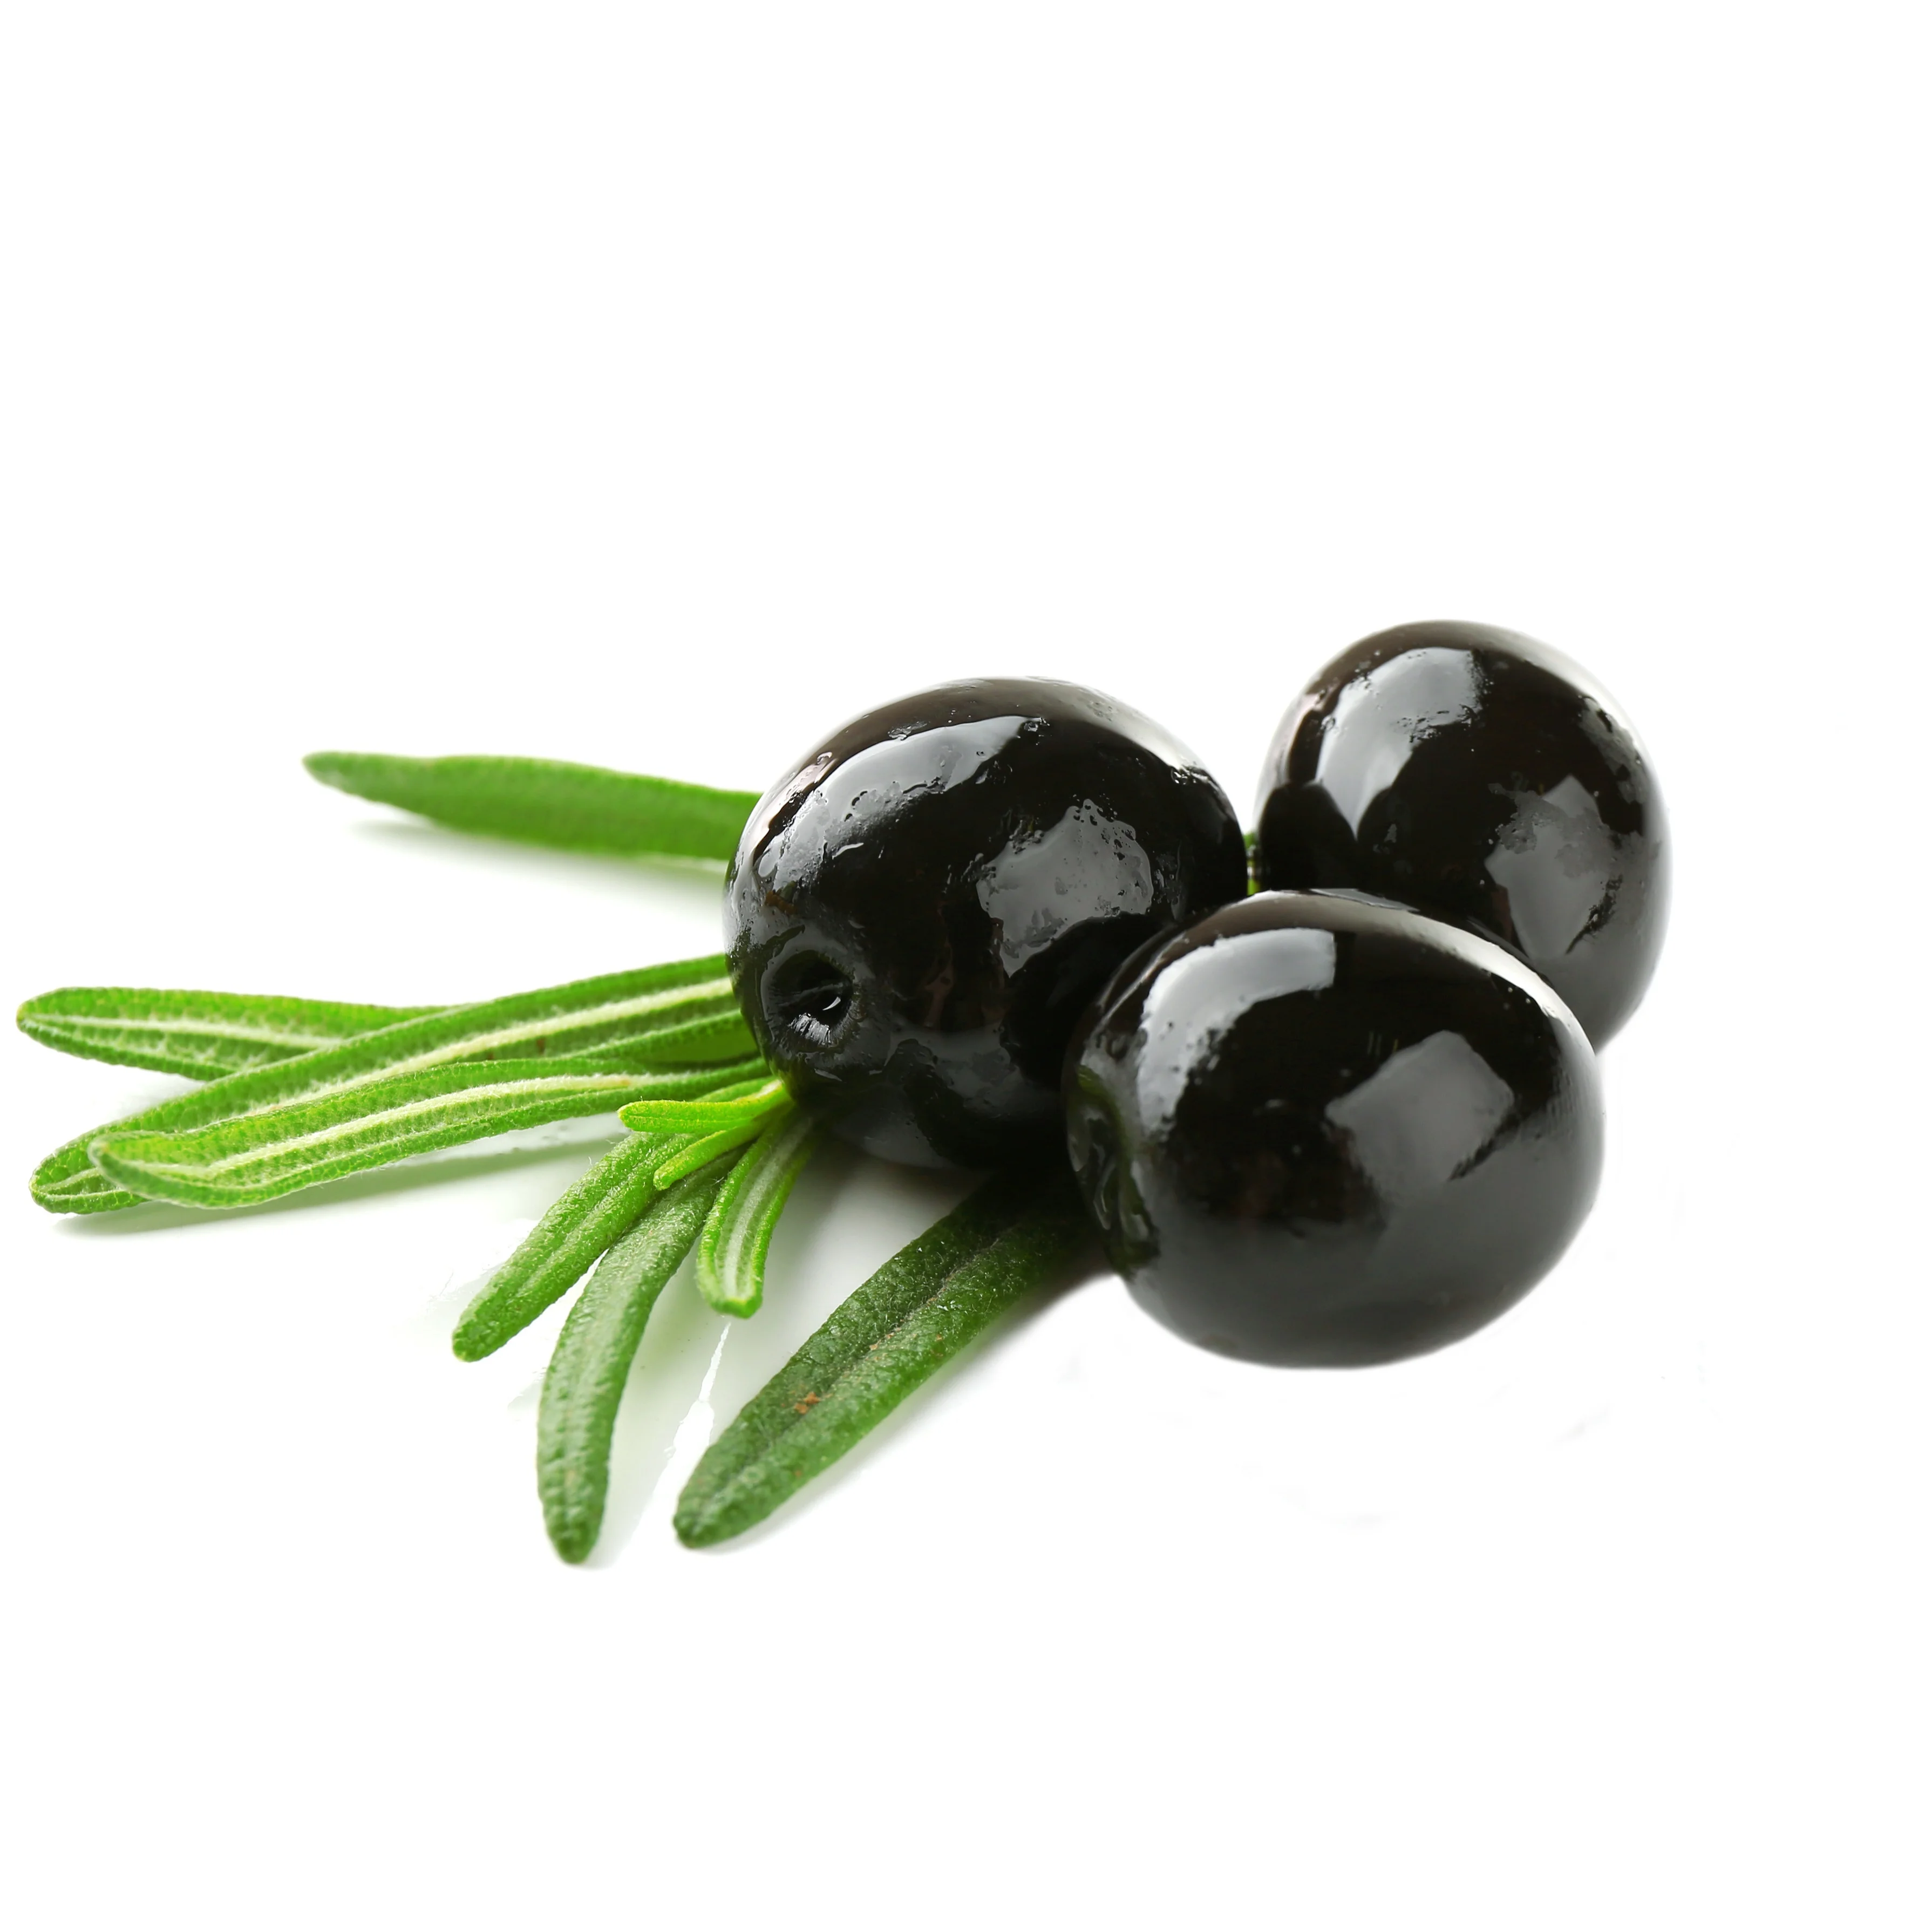 %100 Natural Turkish Cracked Olives Fresh Superior High Quality  Natural Maturity North East Aegean Scratched Black Olive